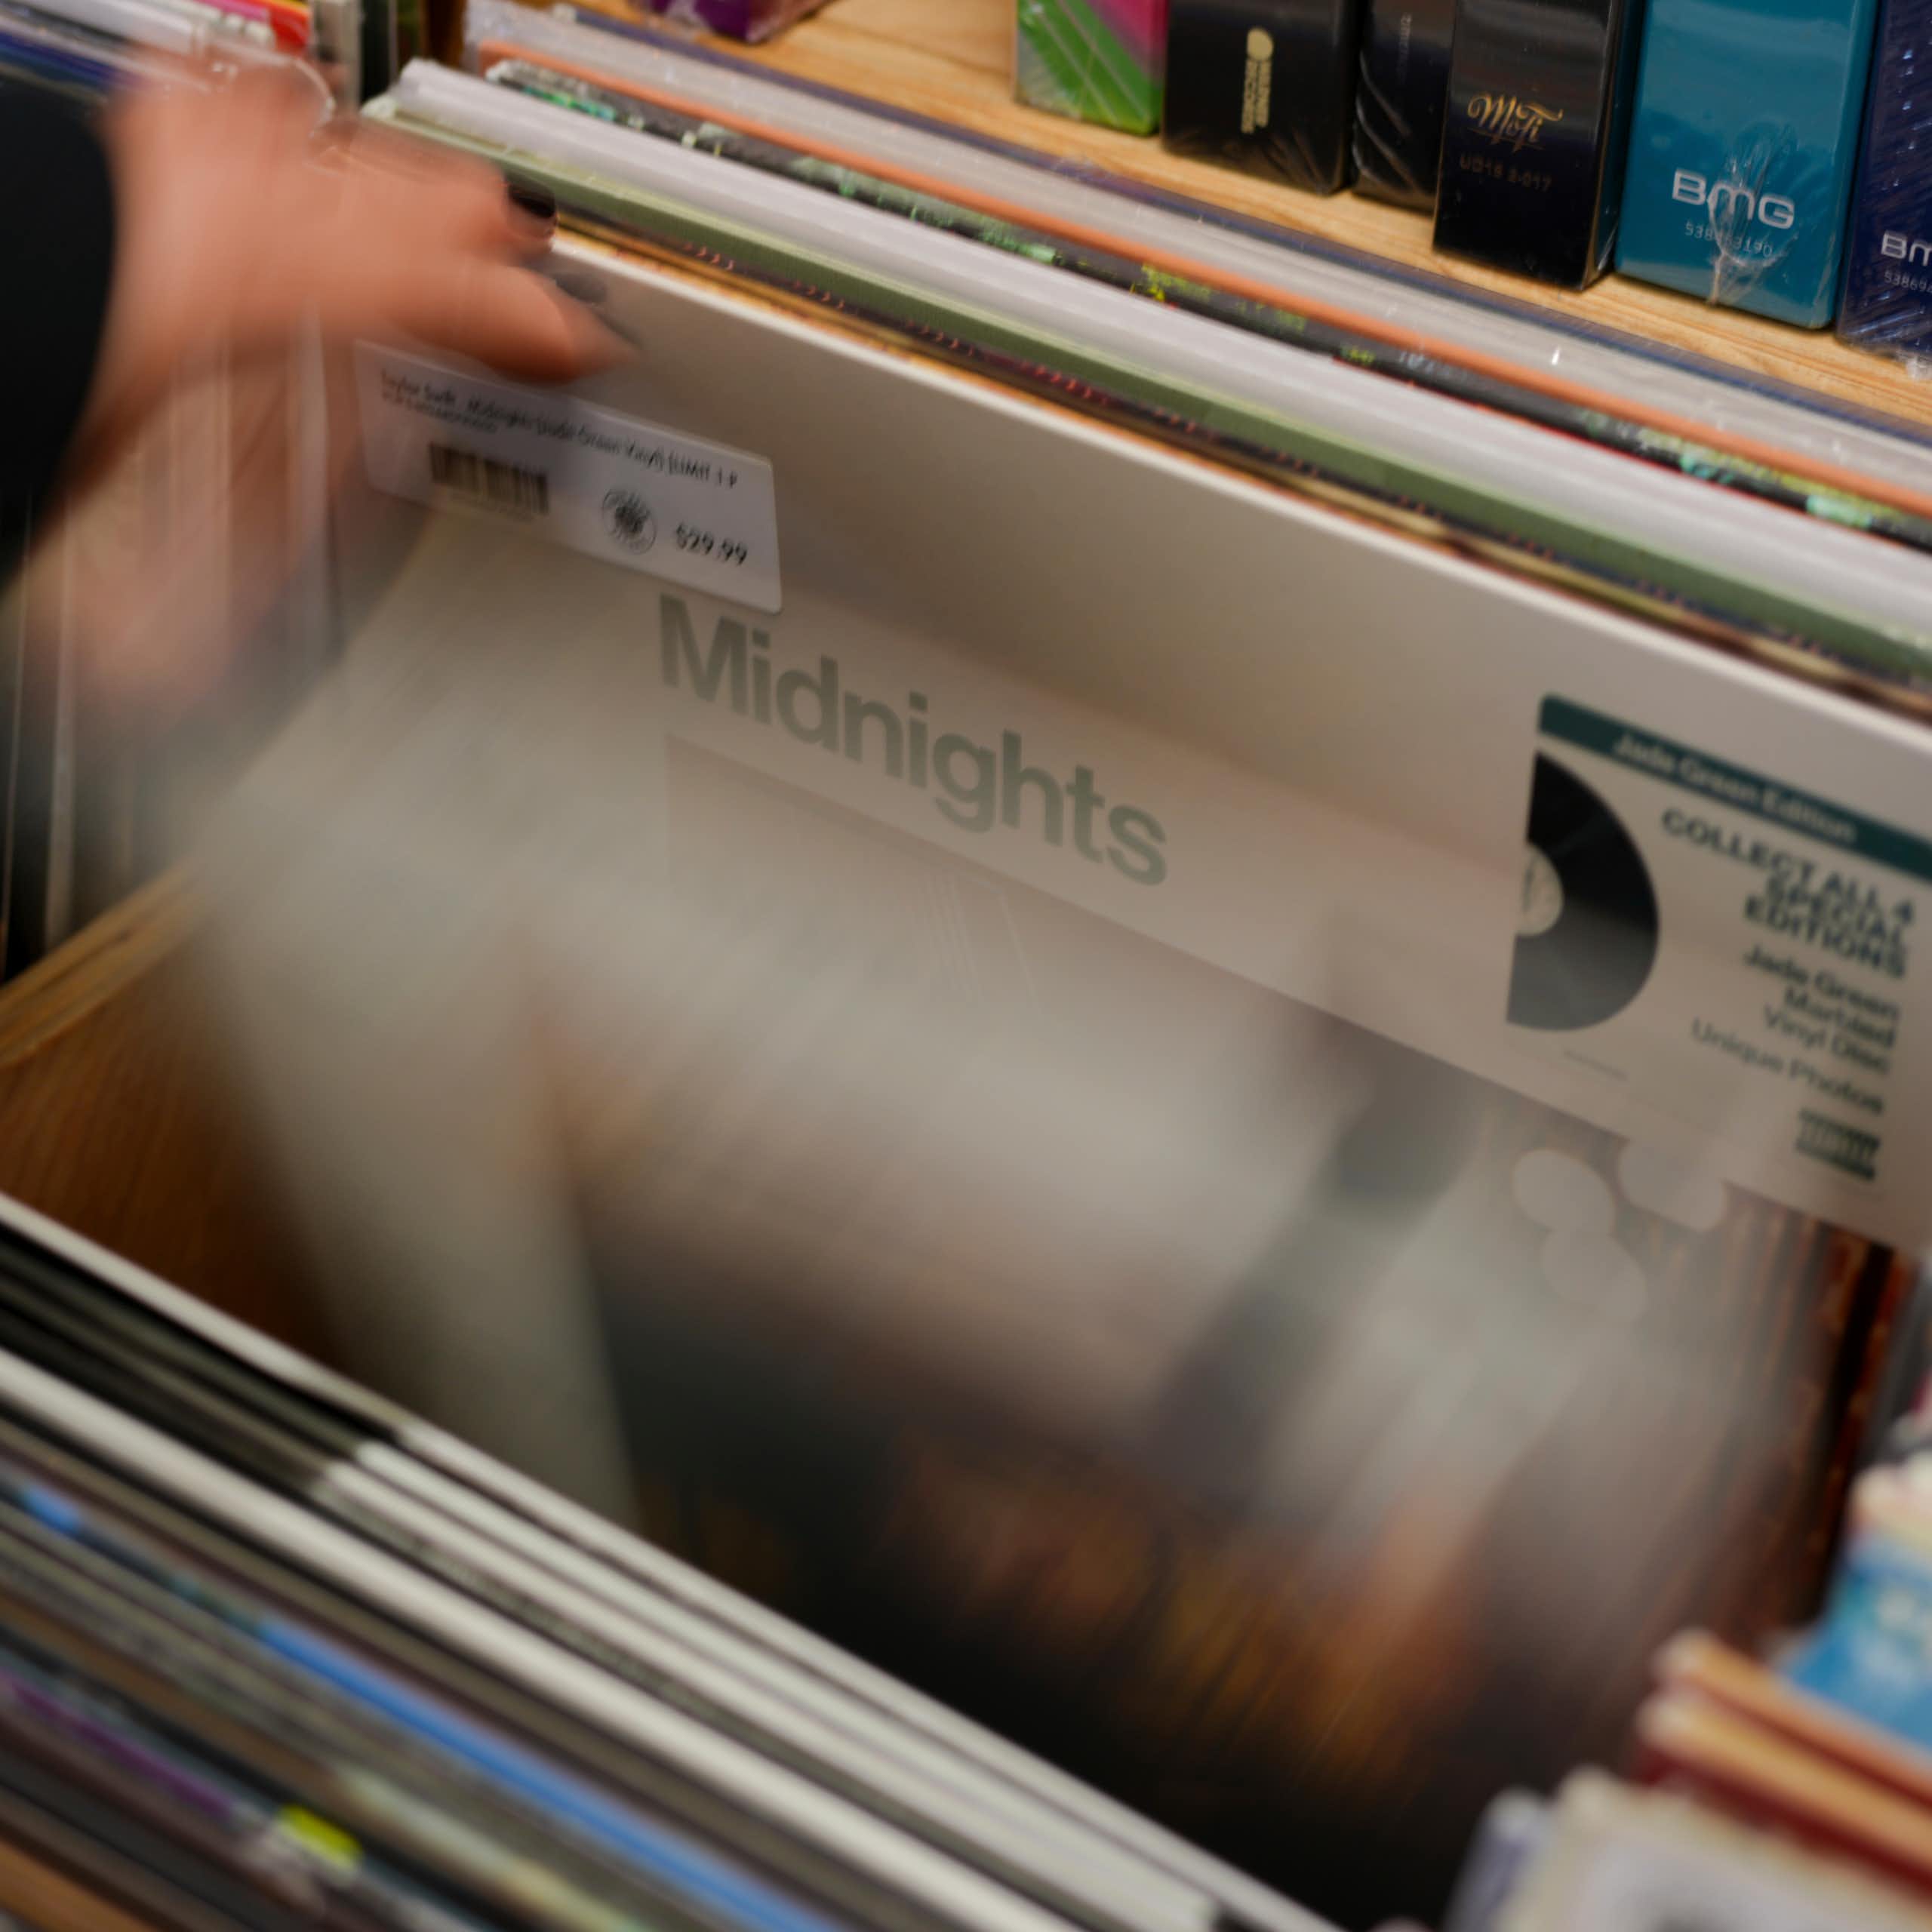 The triumph of vinyl: Vintage is back as LP sales continue to skyrocket